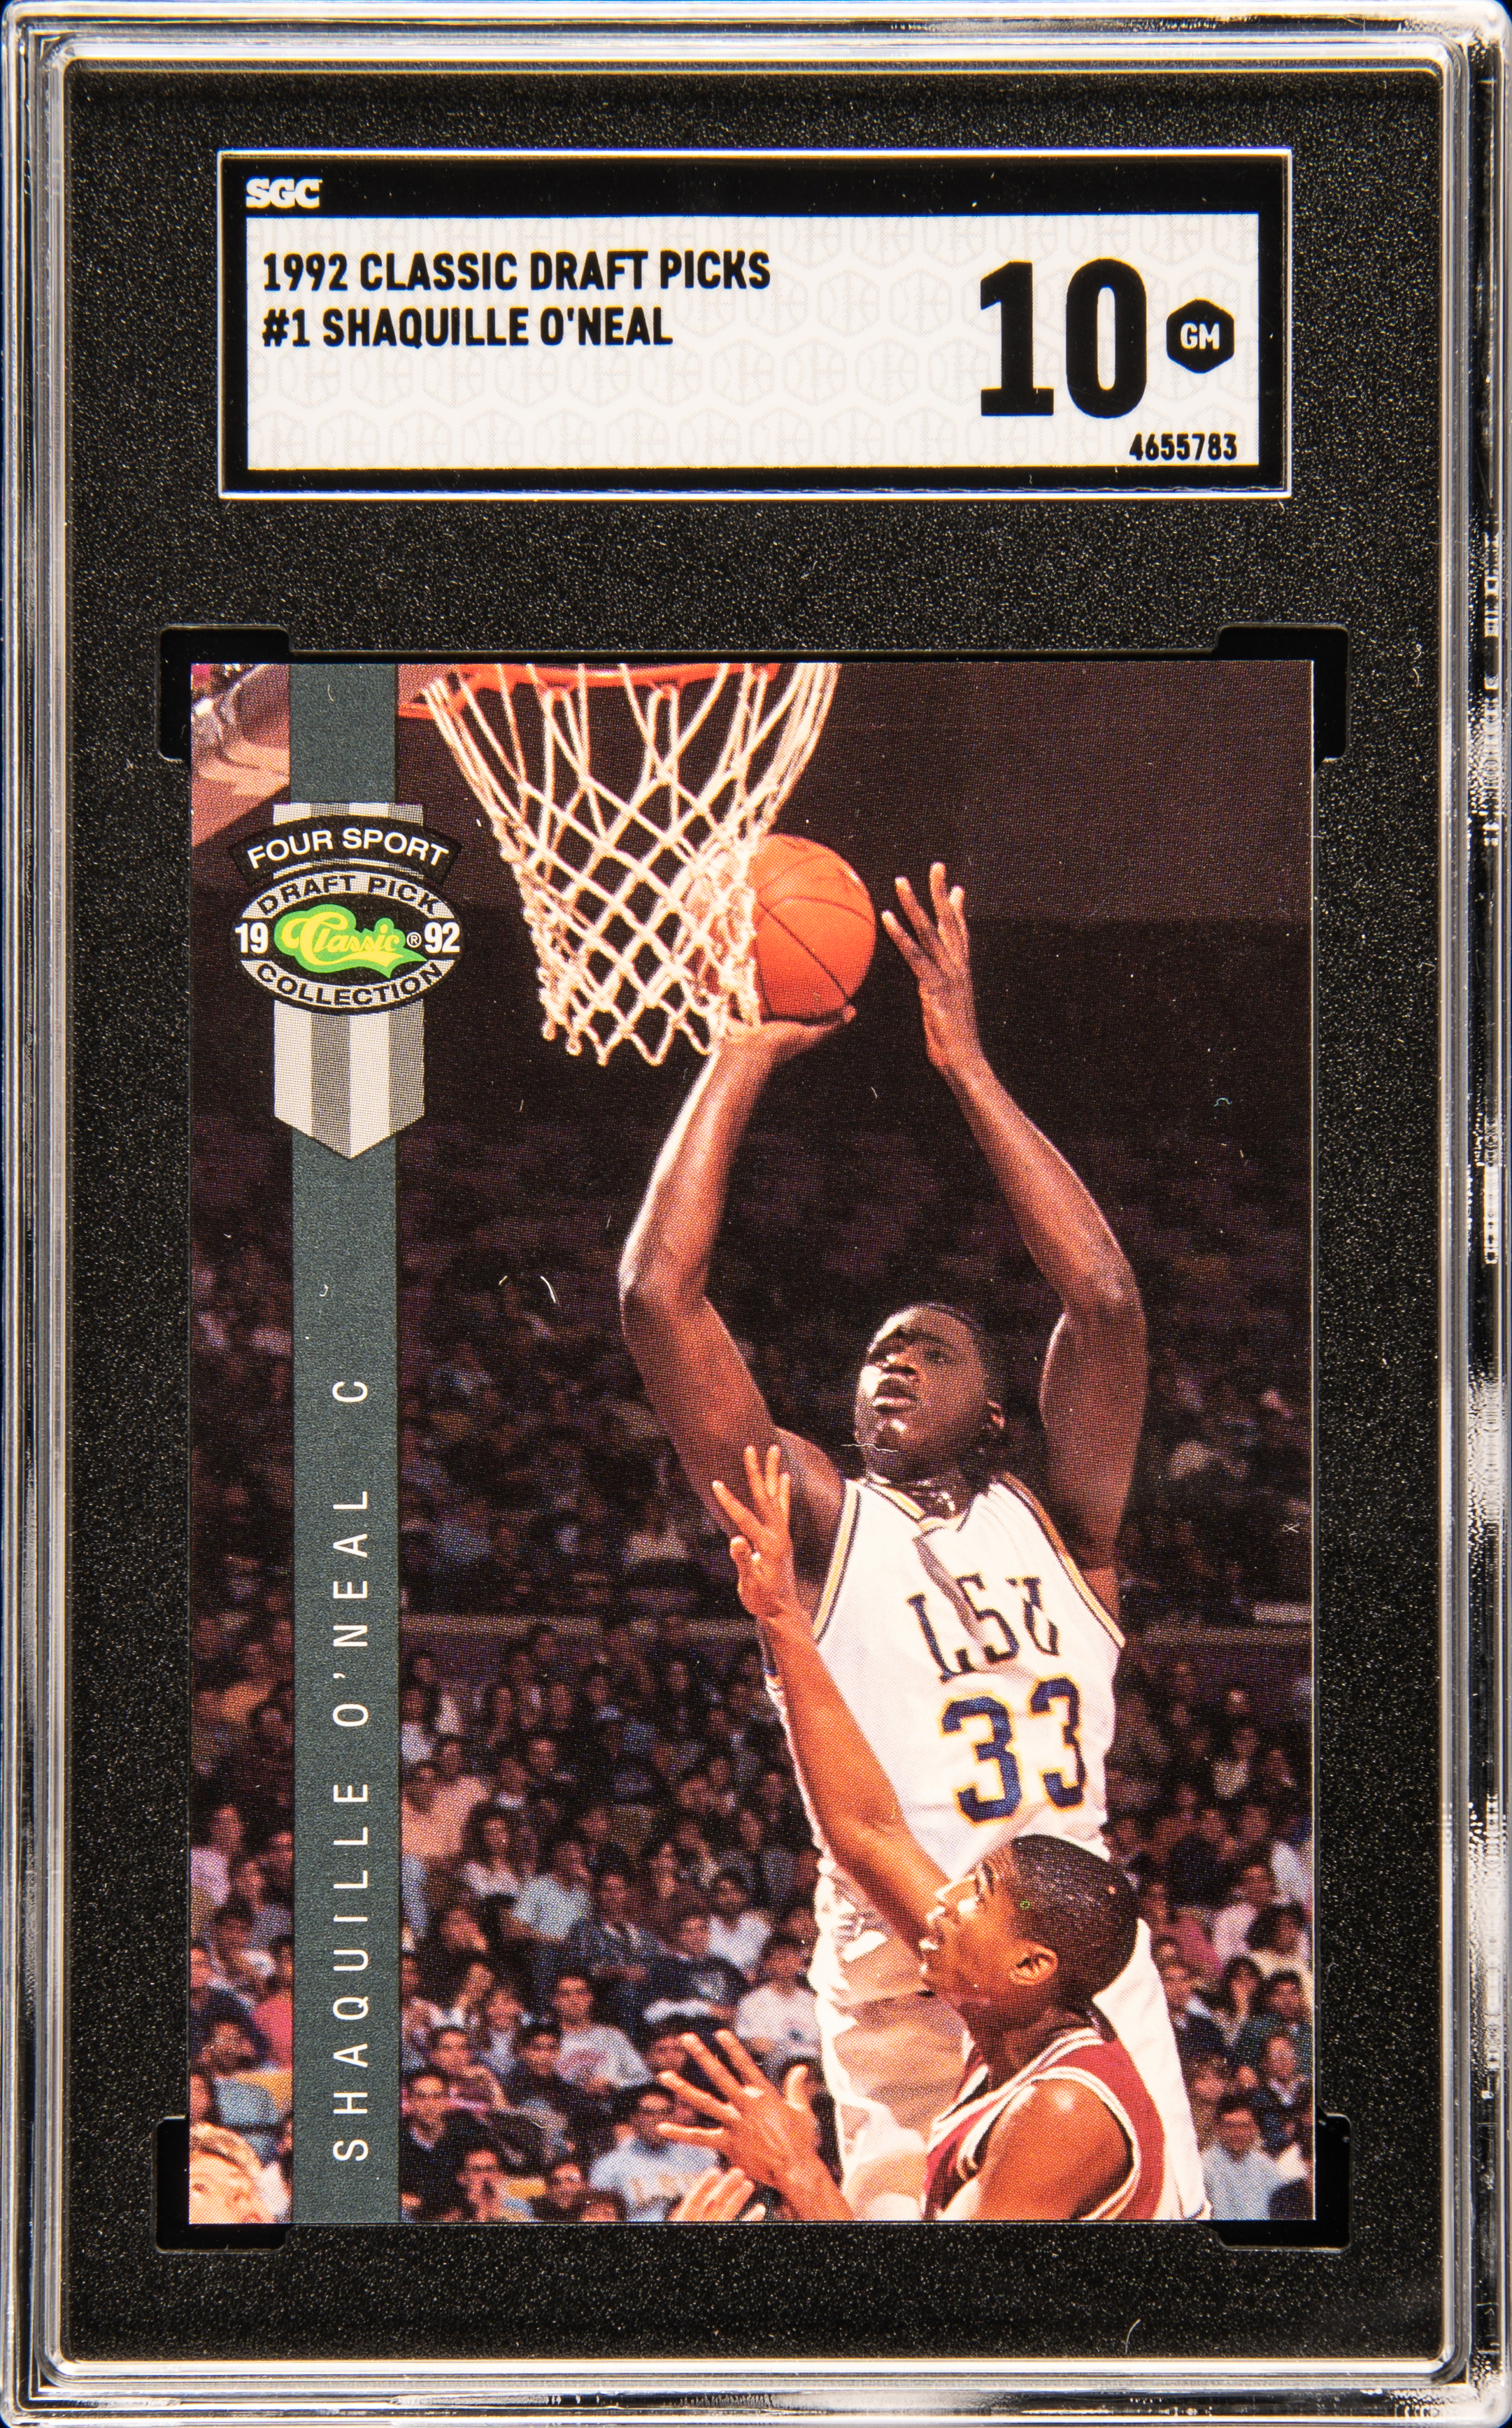 1992-93 Classic Draft Picks #1 Shaquille O'Neal Rookie Card - SGC GM 10